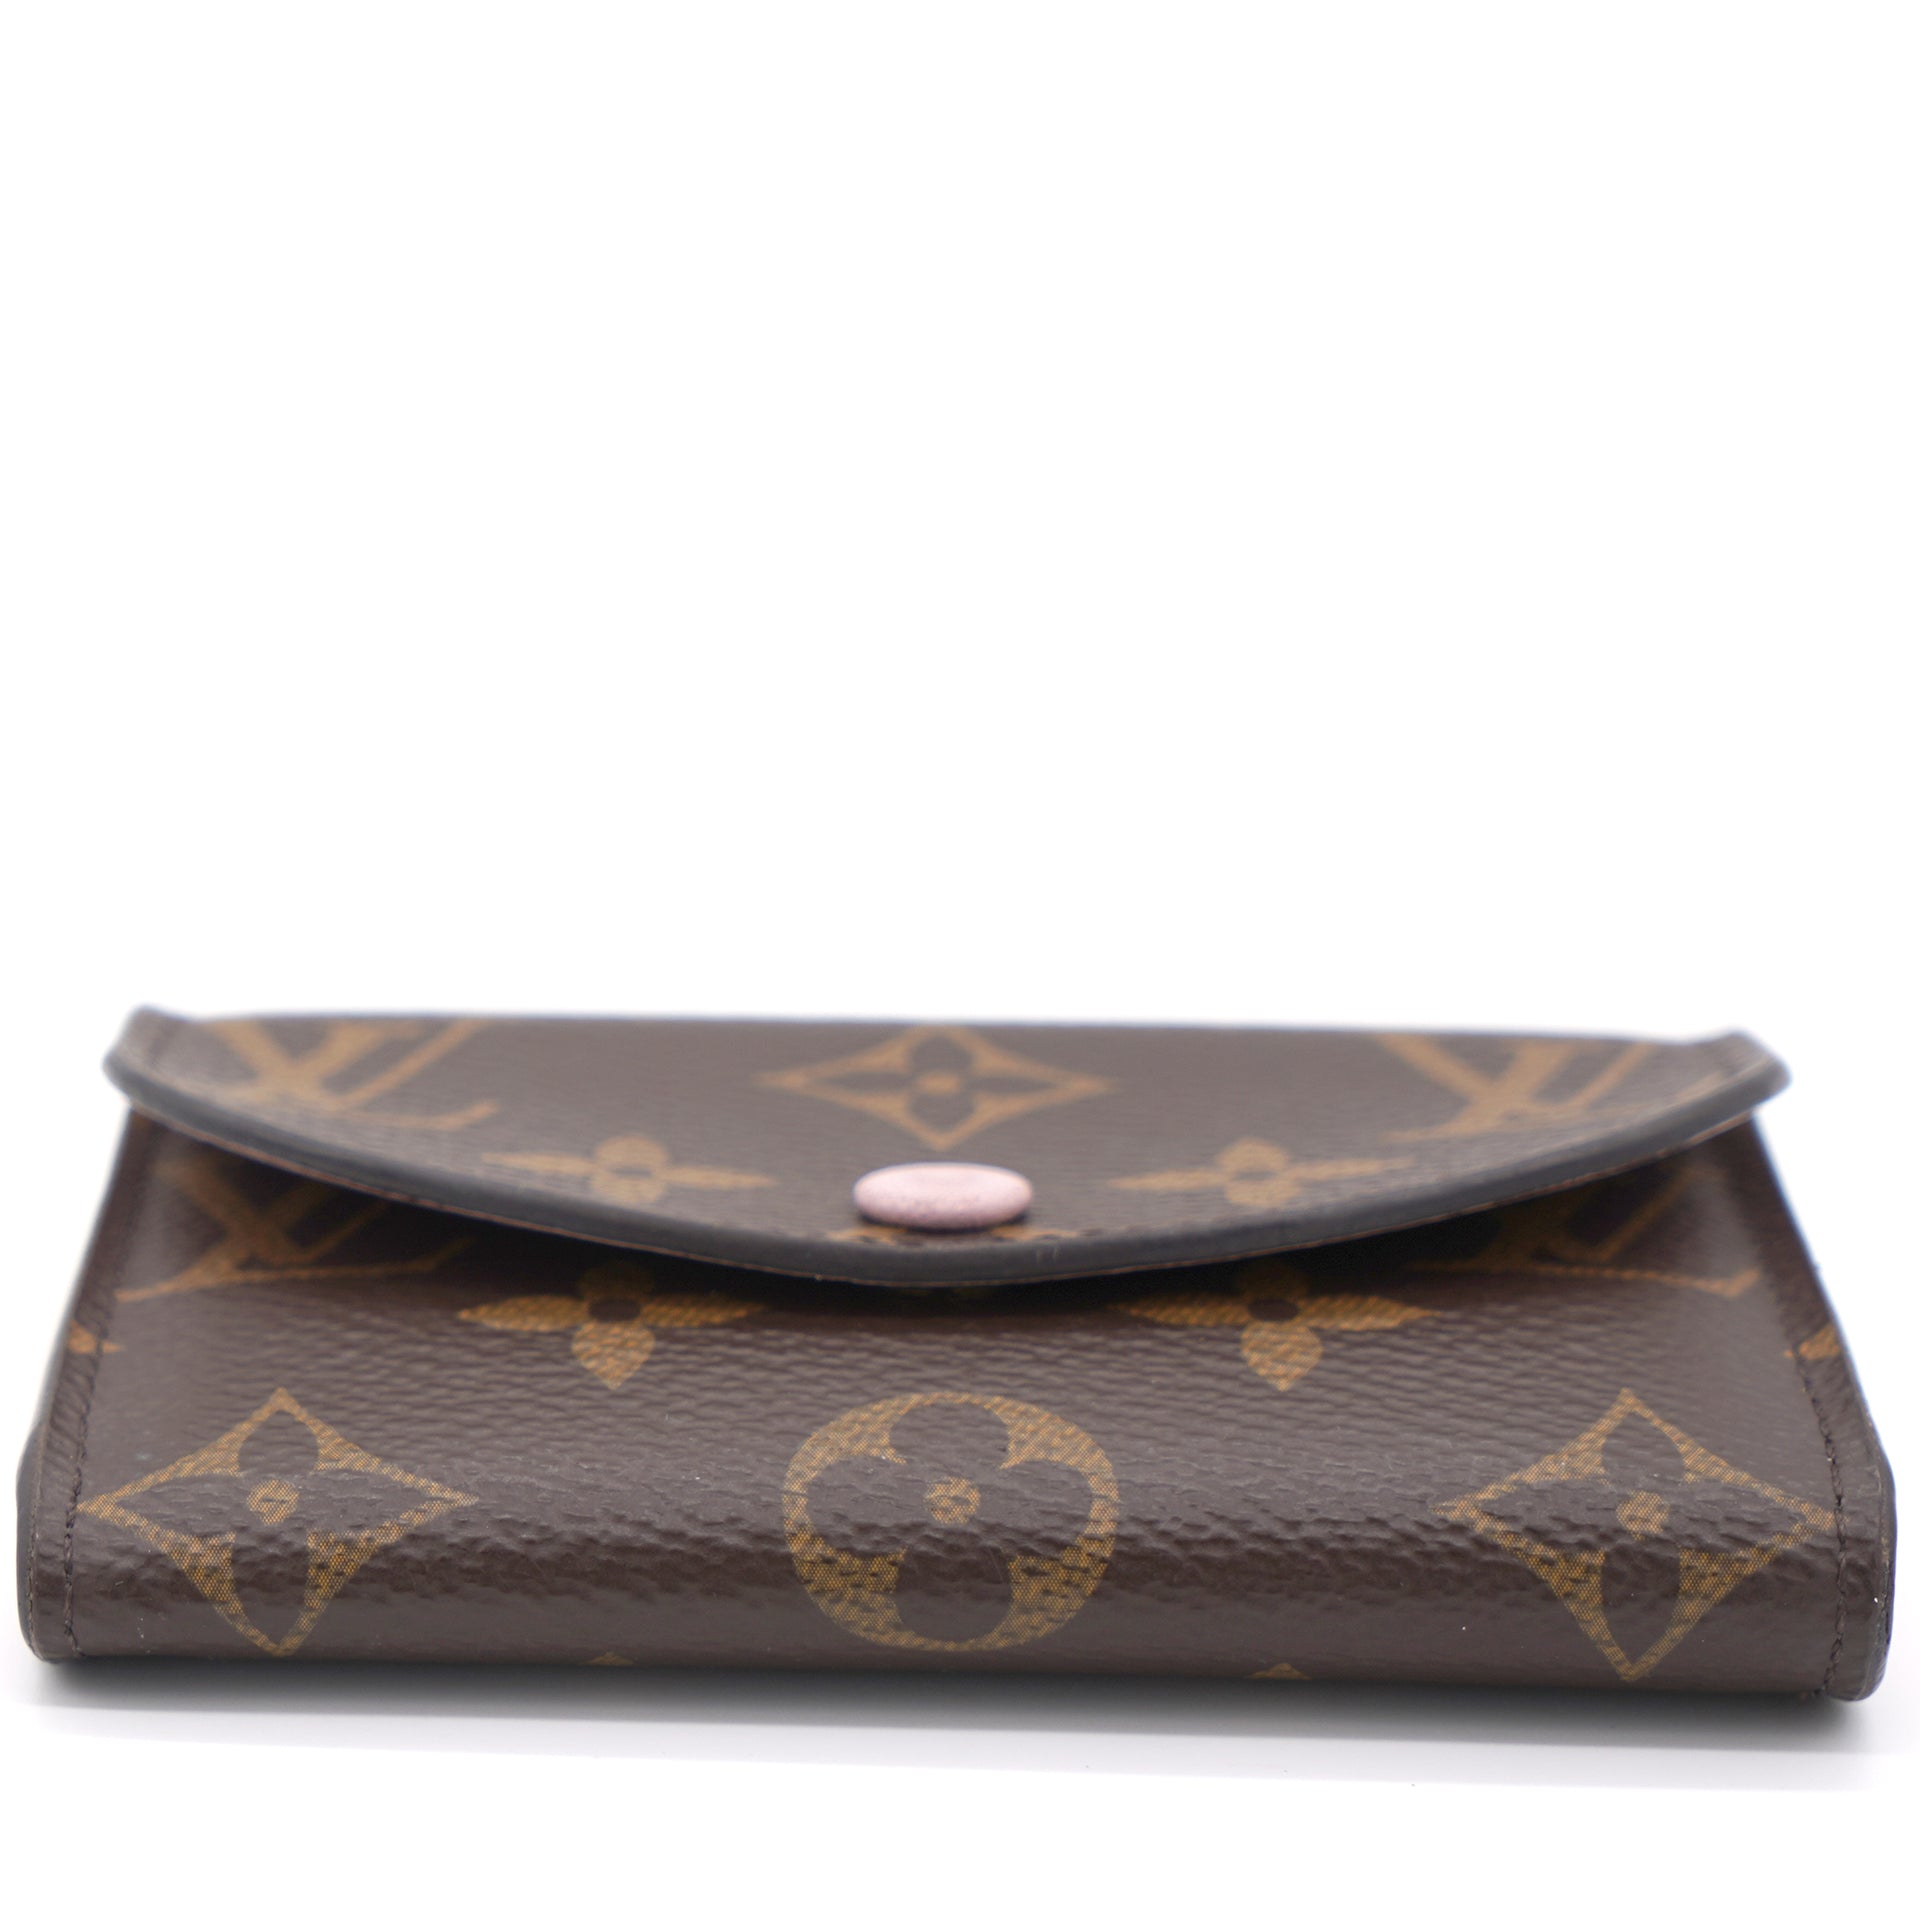 HER Authentic - Louis Vuitton Monogram Rosalie Coin Purse Rose Ballerine is  on our website for $300. Comes with the box and dust bag.